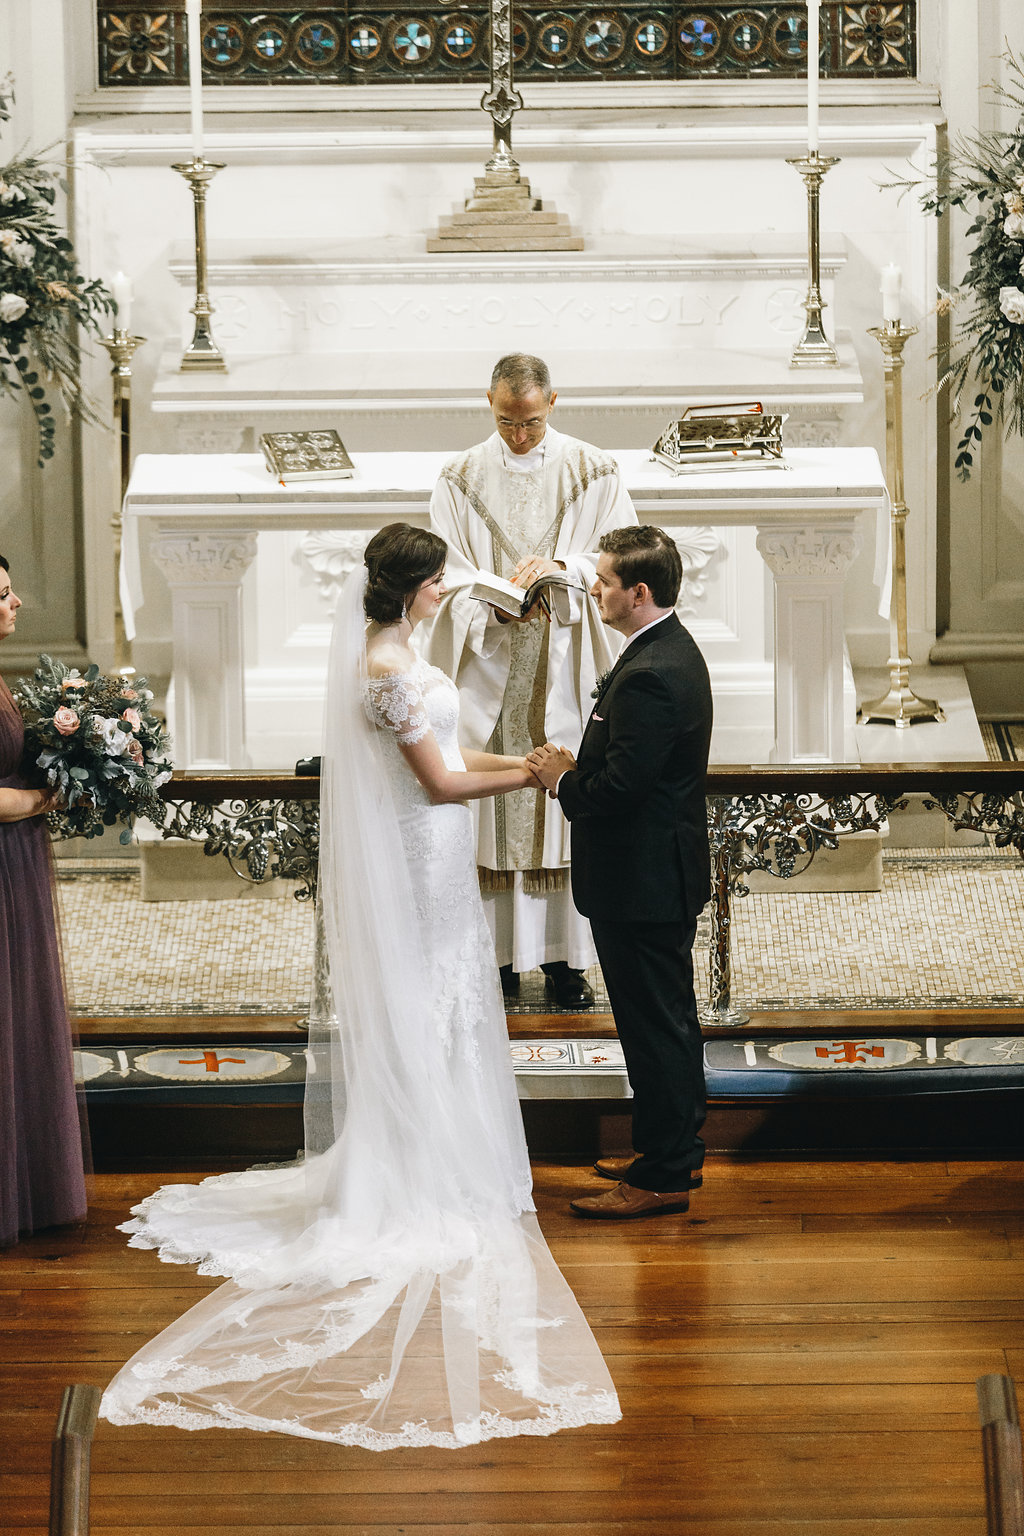 The ceremony was formal, in the most beautiful church of Savannah